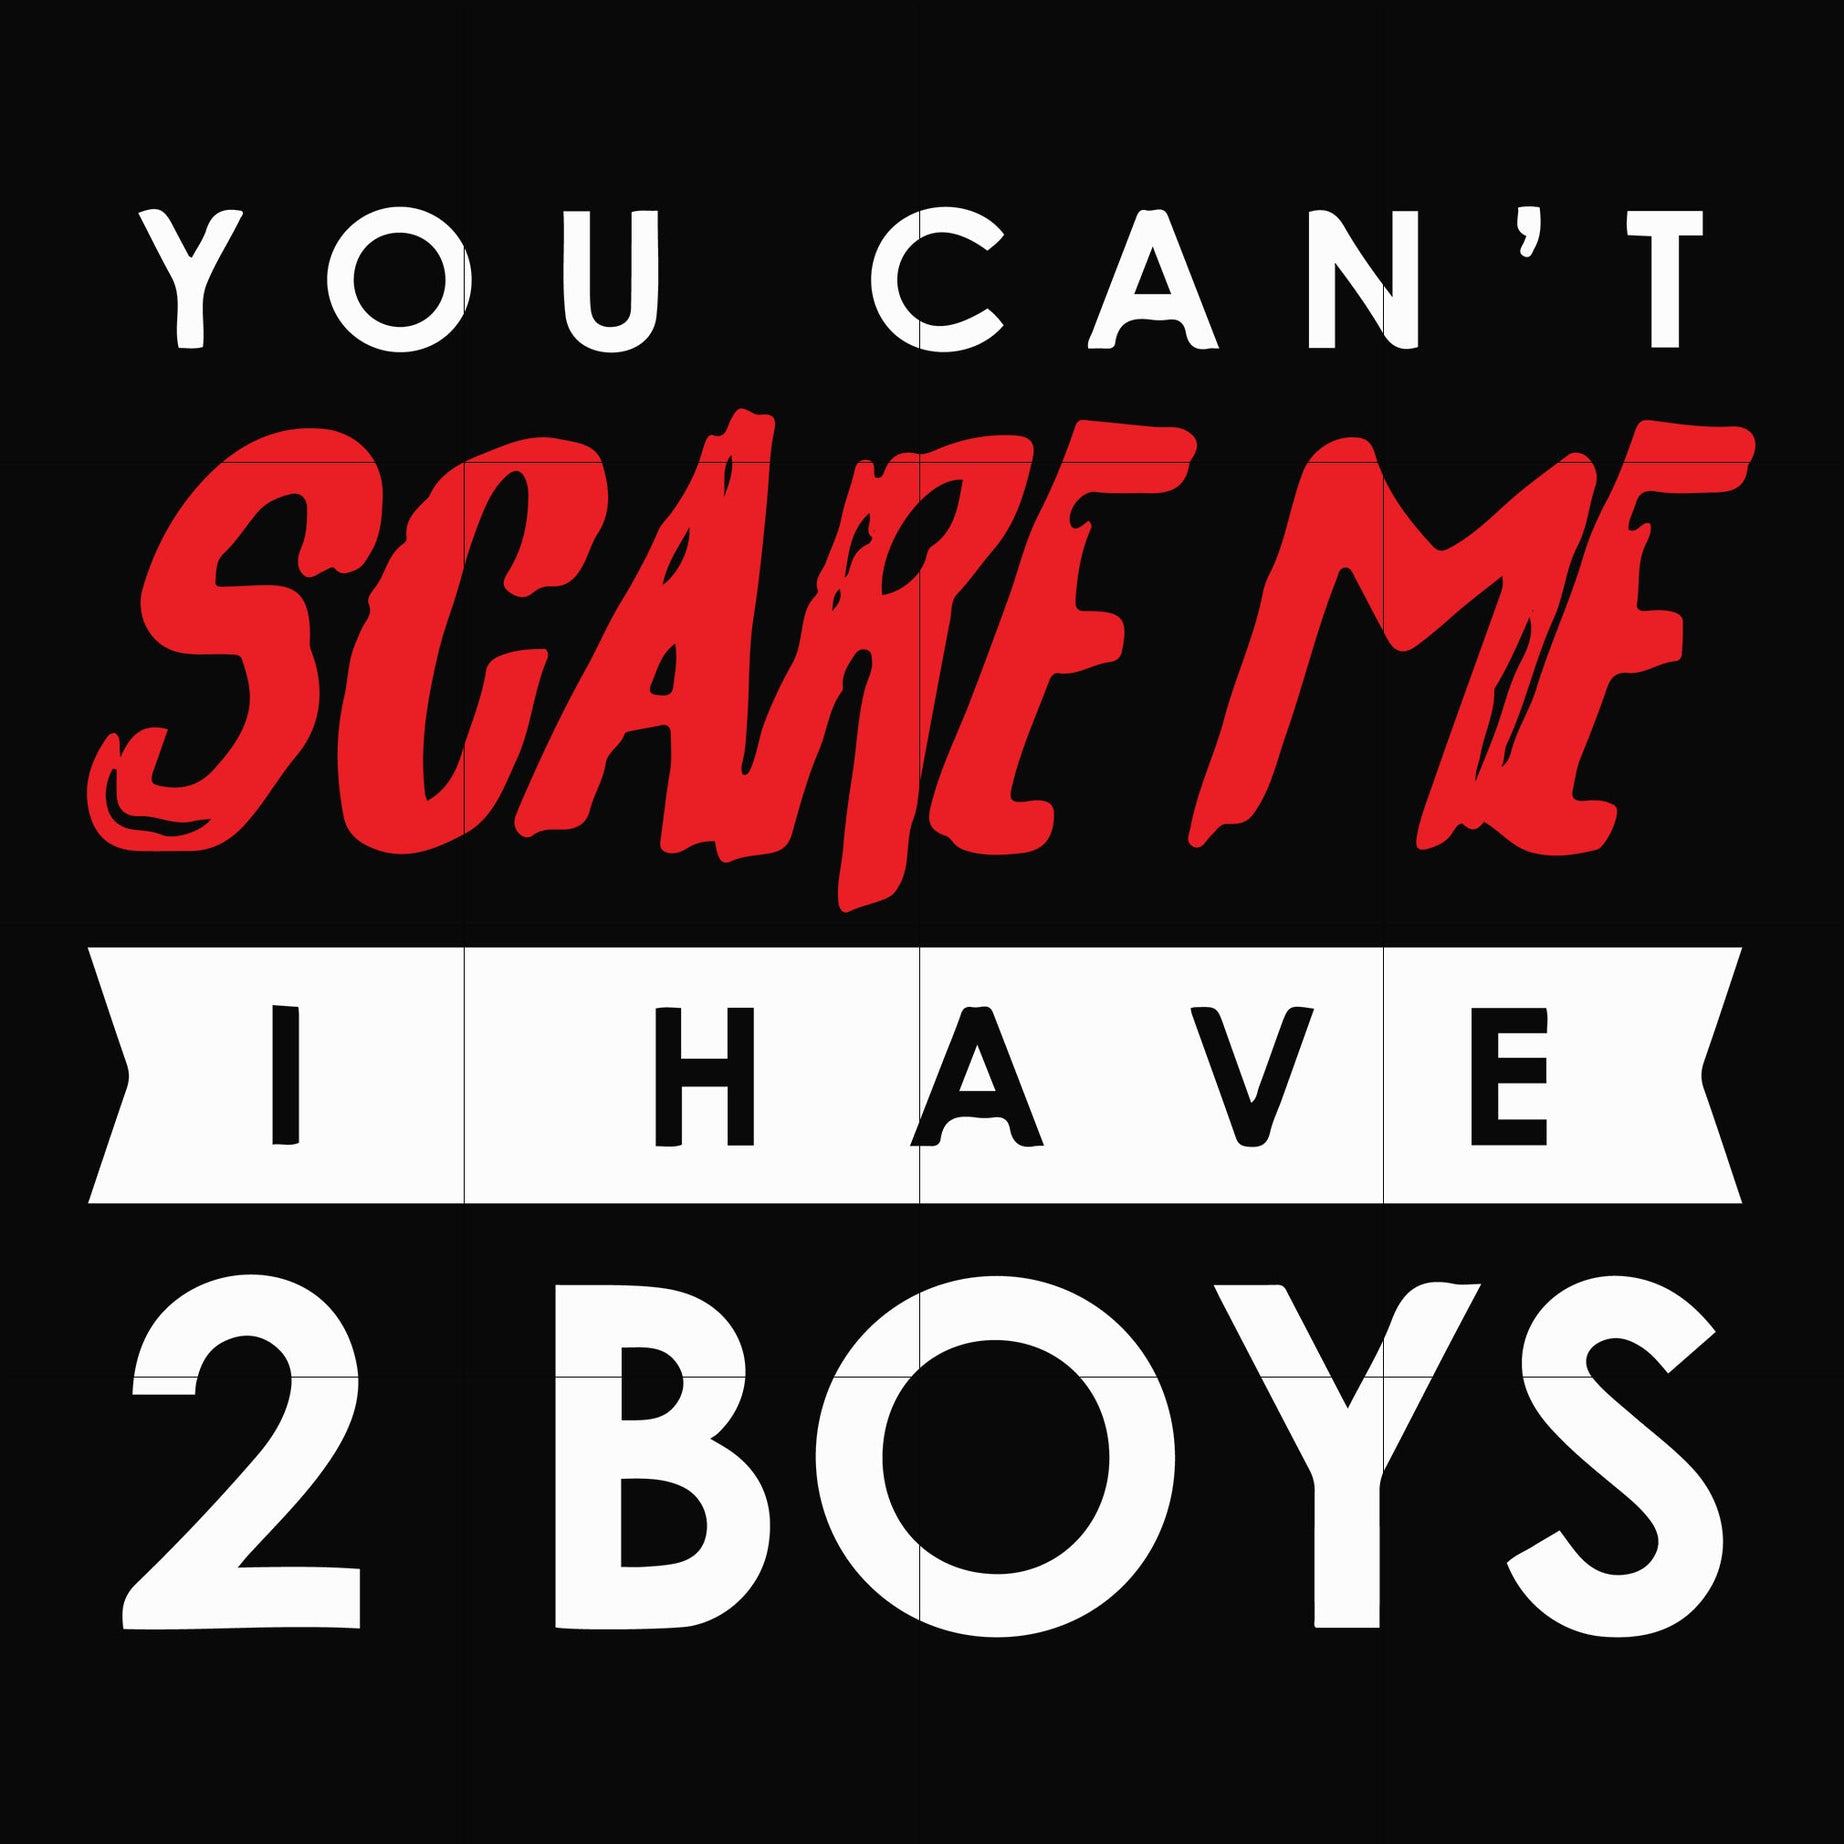 You cant scare me i have 2 boys, halloween svg, png, dxf, eps digital file HLW2307217